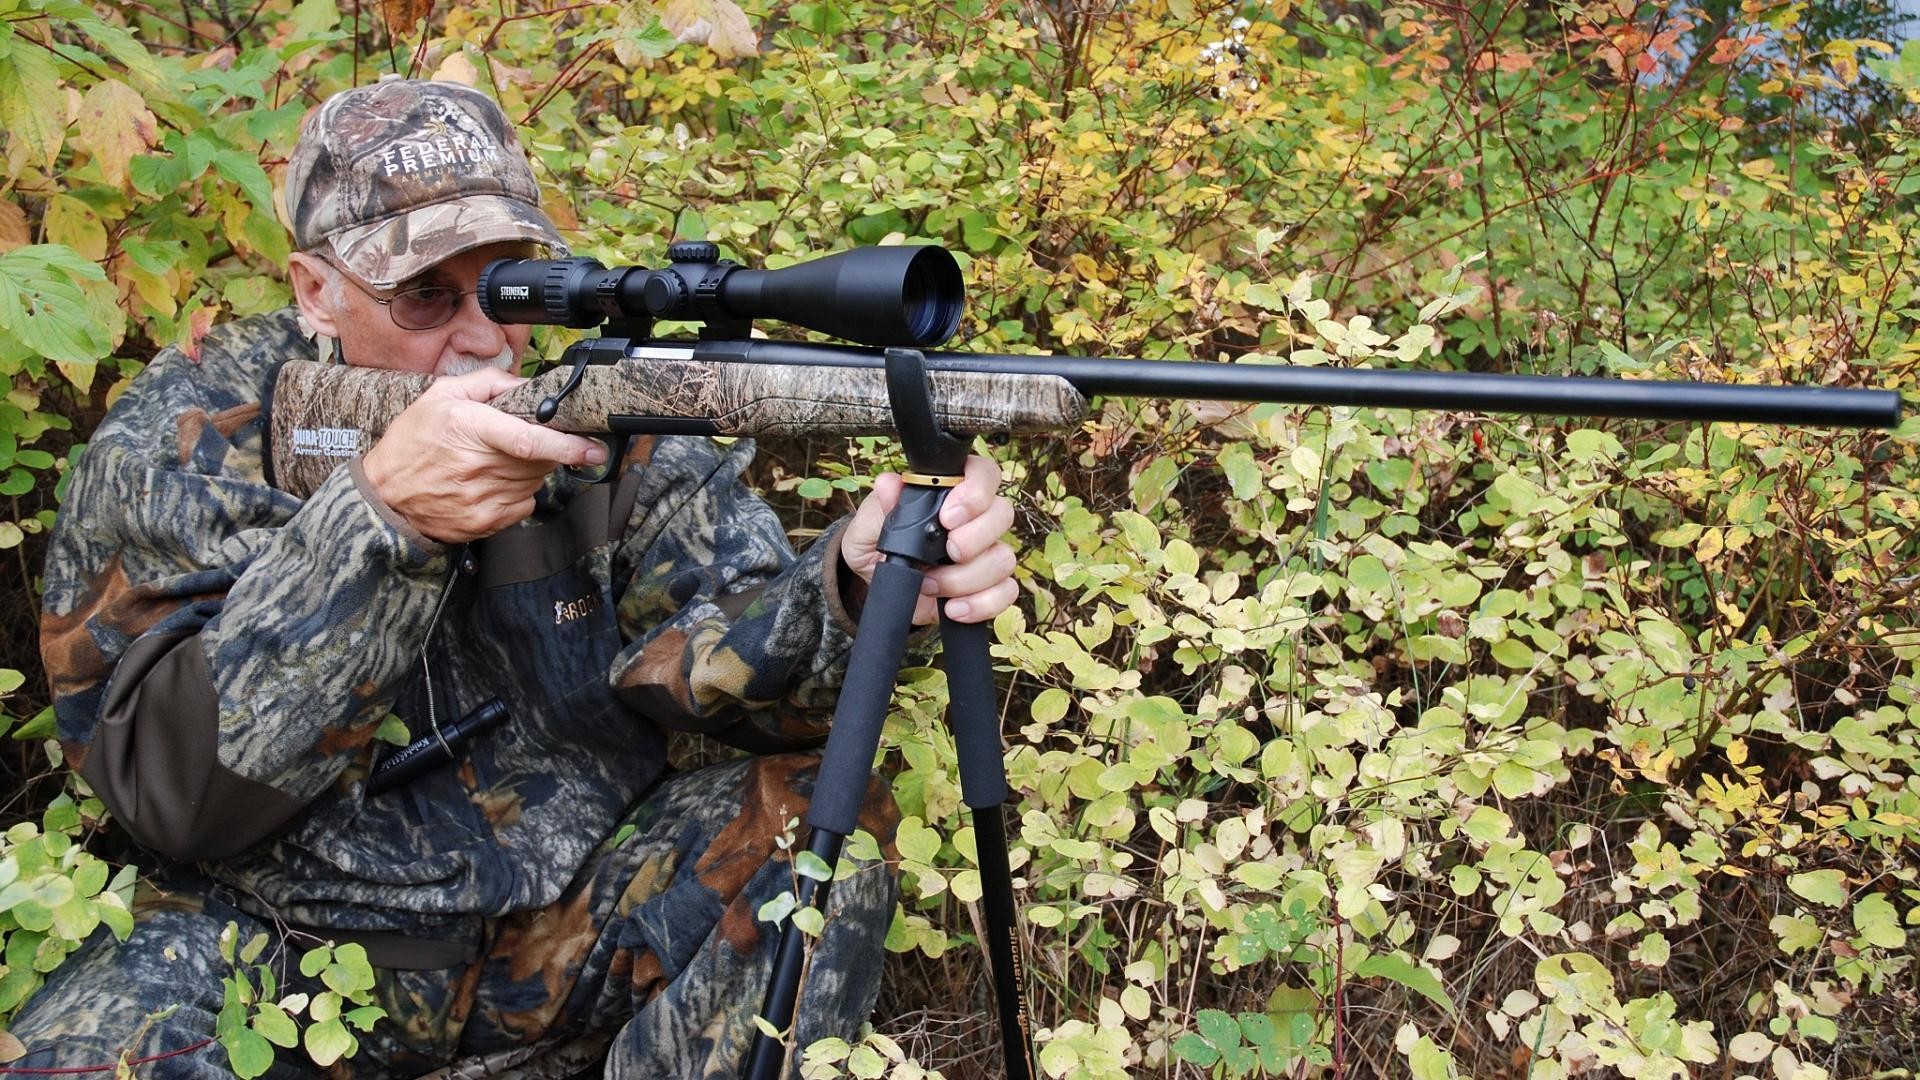 1920x1080 Gun review: Browning's X-Bolt Varmint Stalker offers consistent accuracy -  Outdoor Canada